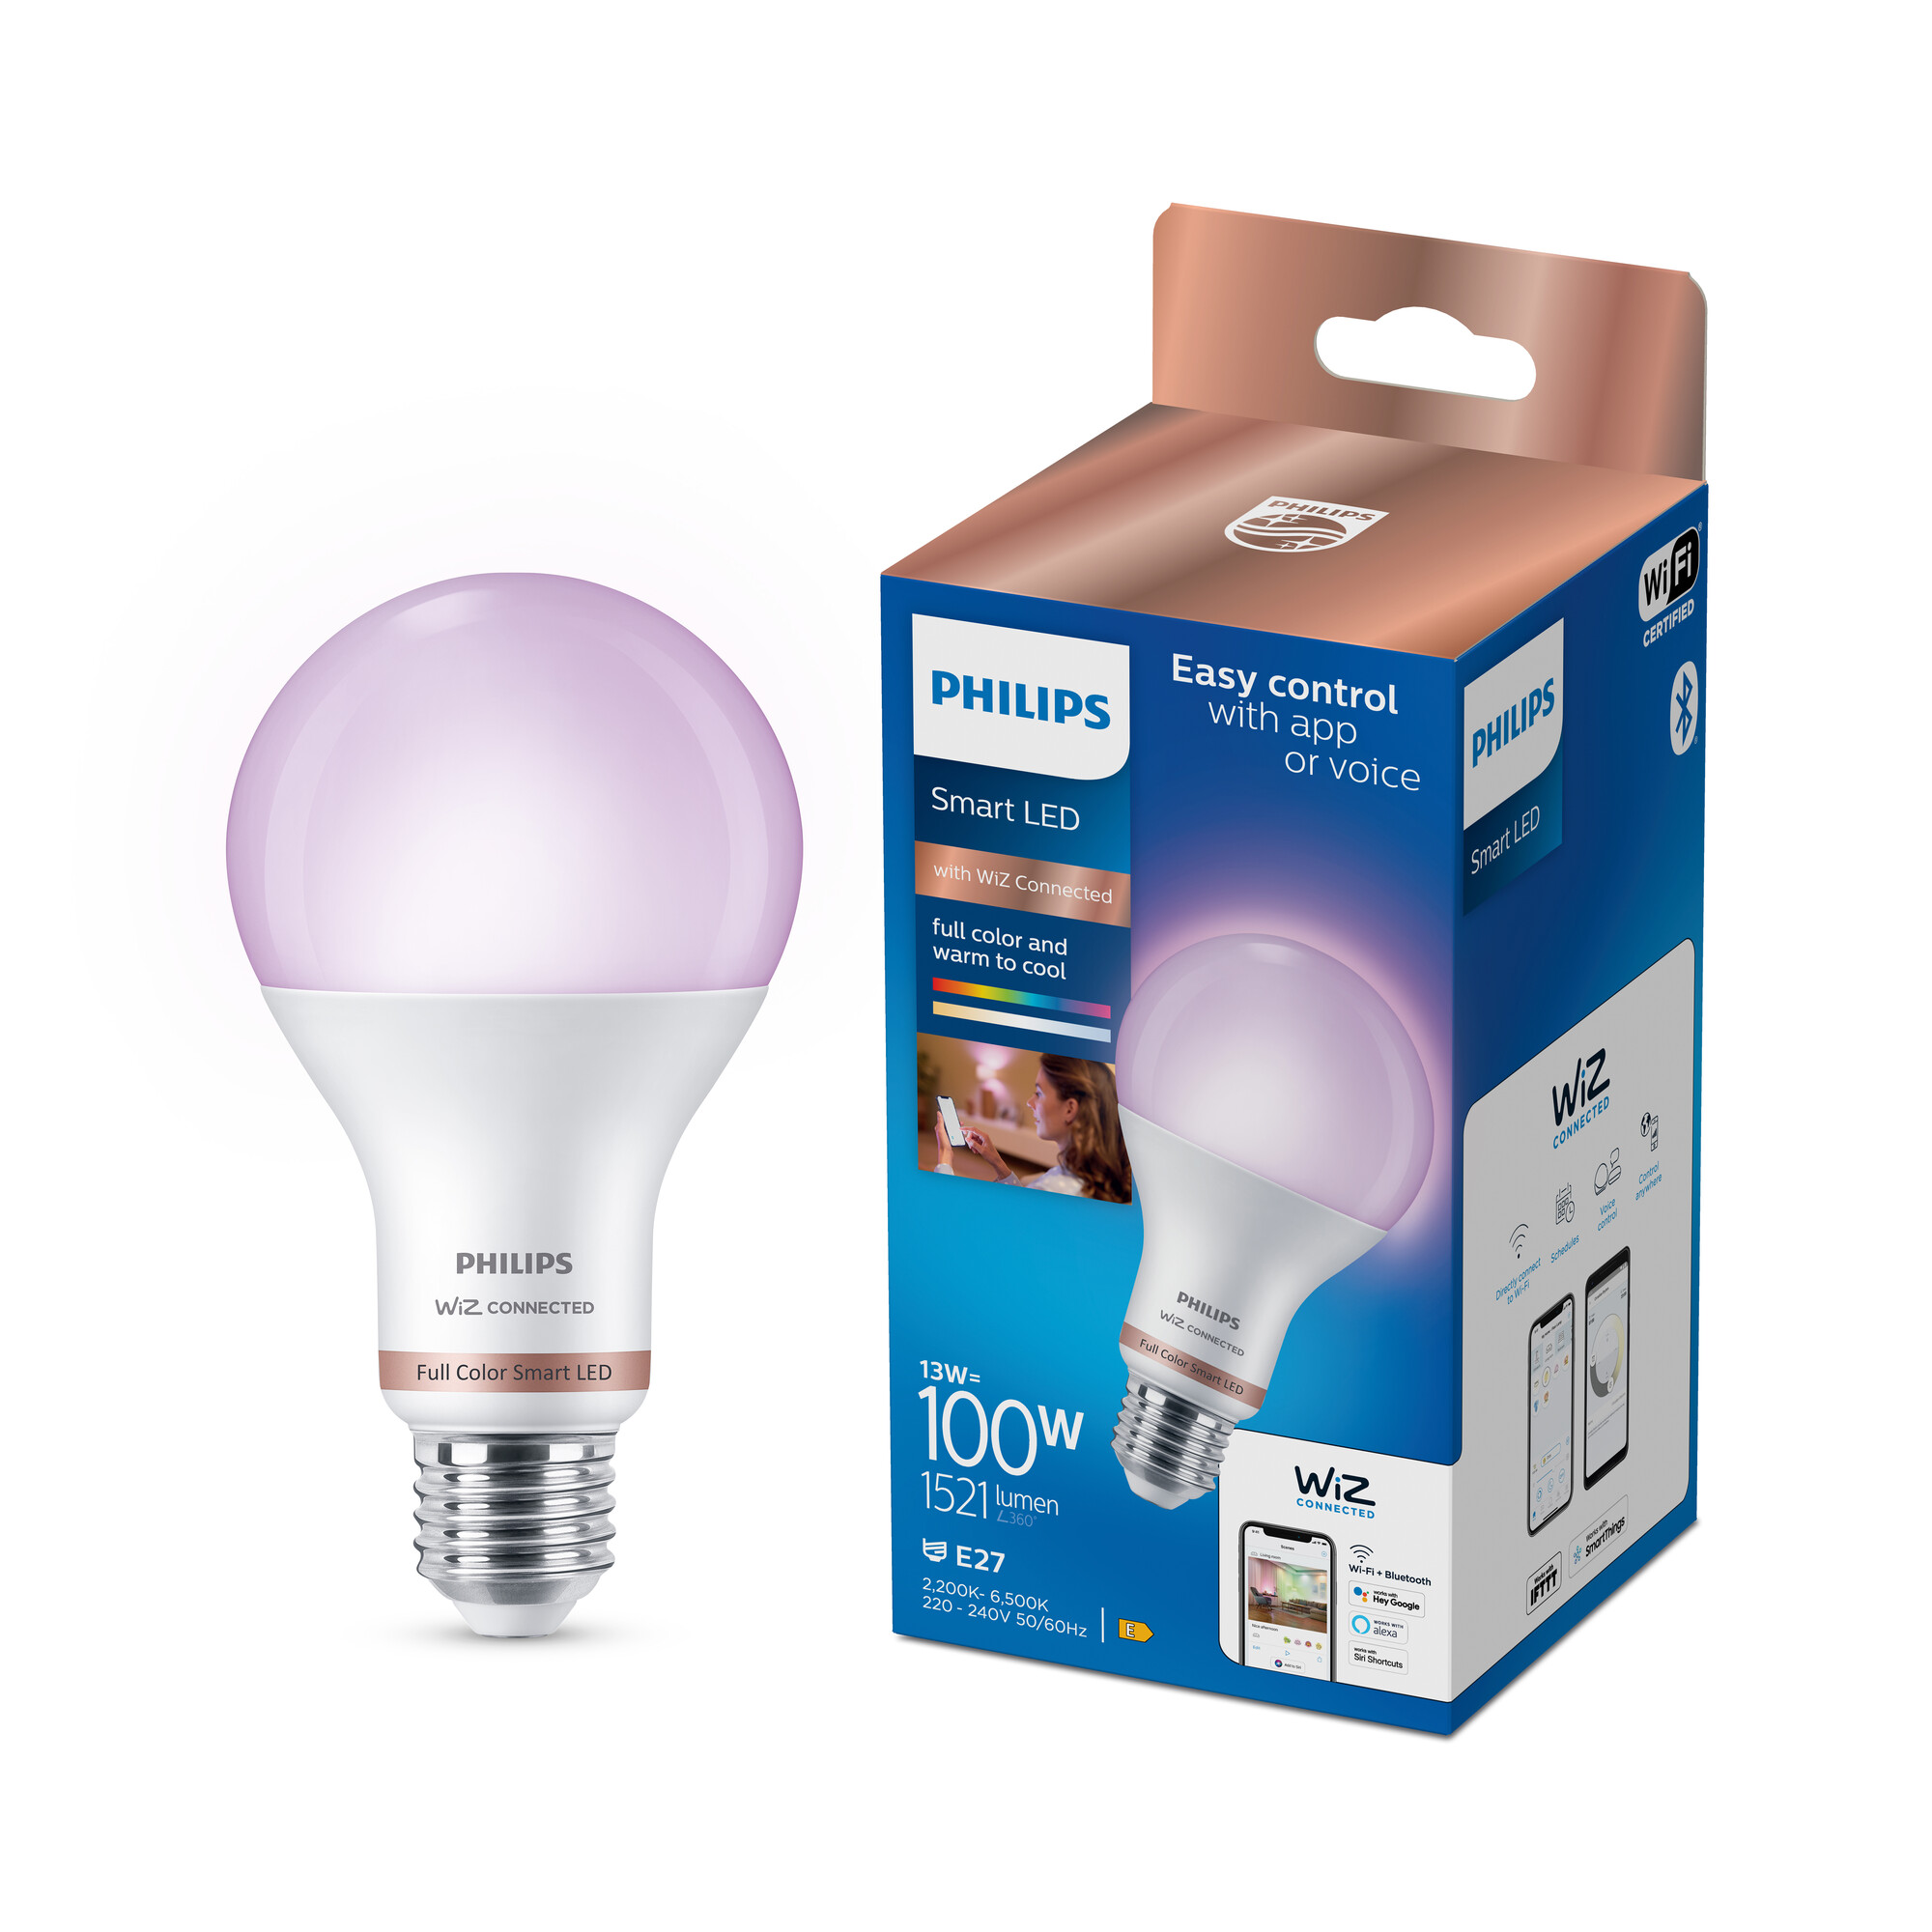 Interessant Kanon opleiding Philips Smart LED Tunable White and Color standaard lamp mat dimbaar - E27  13W 1521lm 2200K-6500K